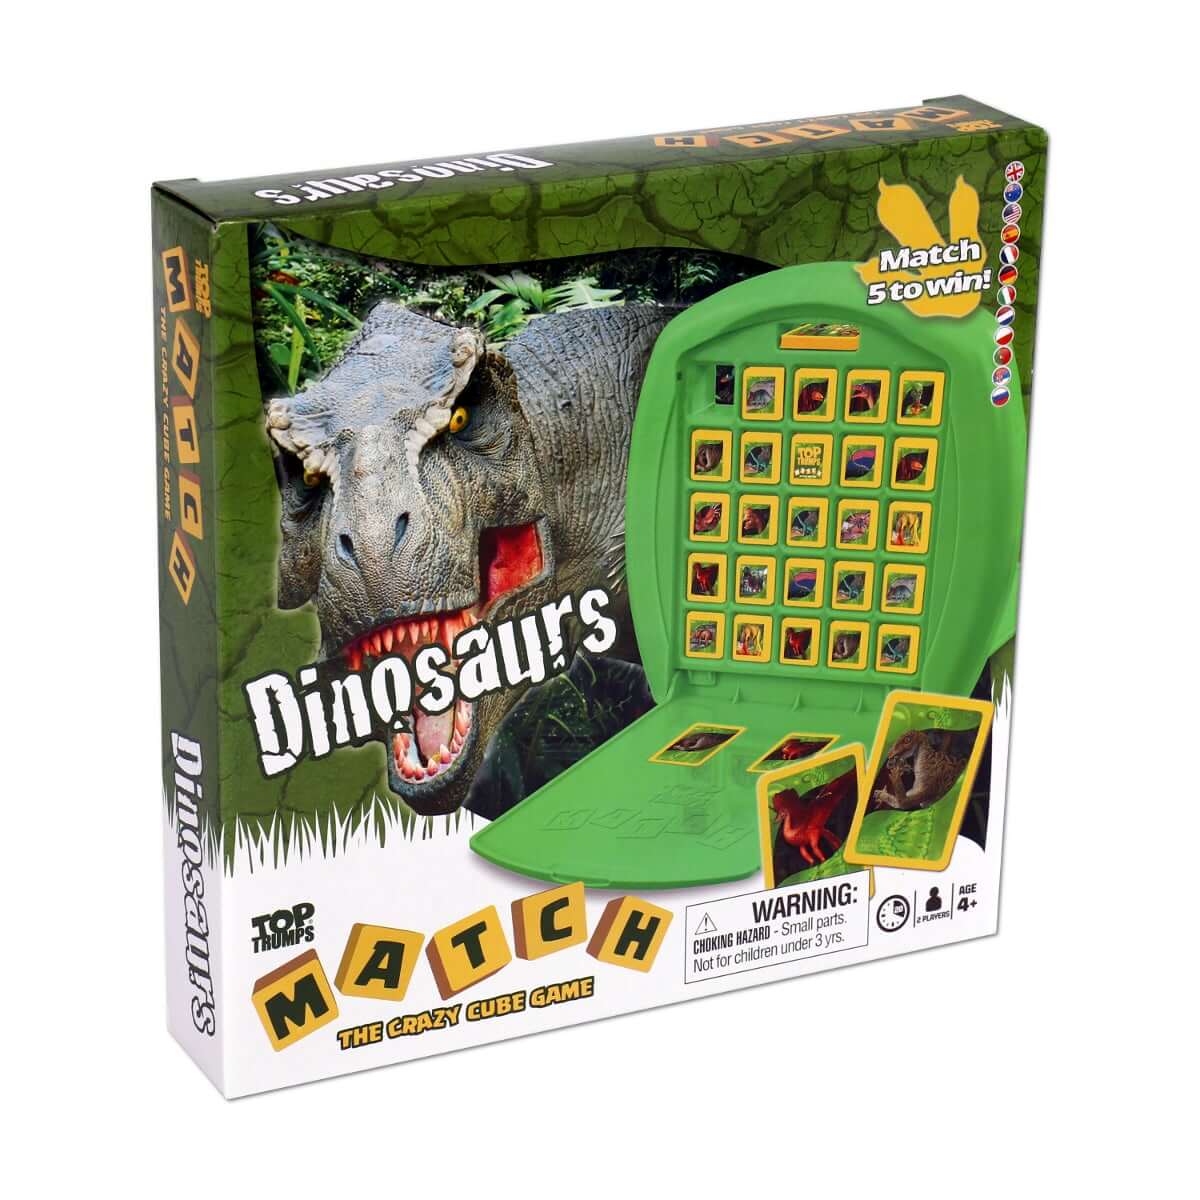 Dinosaurs Top Trumps Match - The Crazy Cube Game